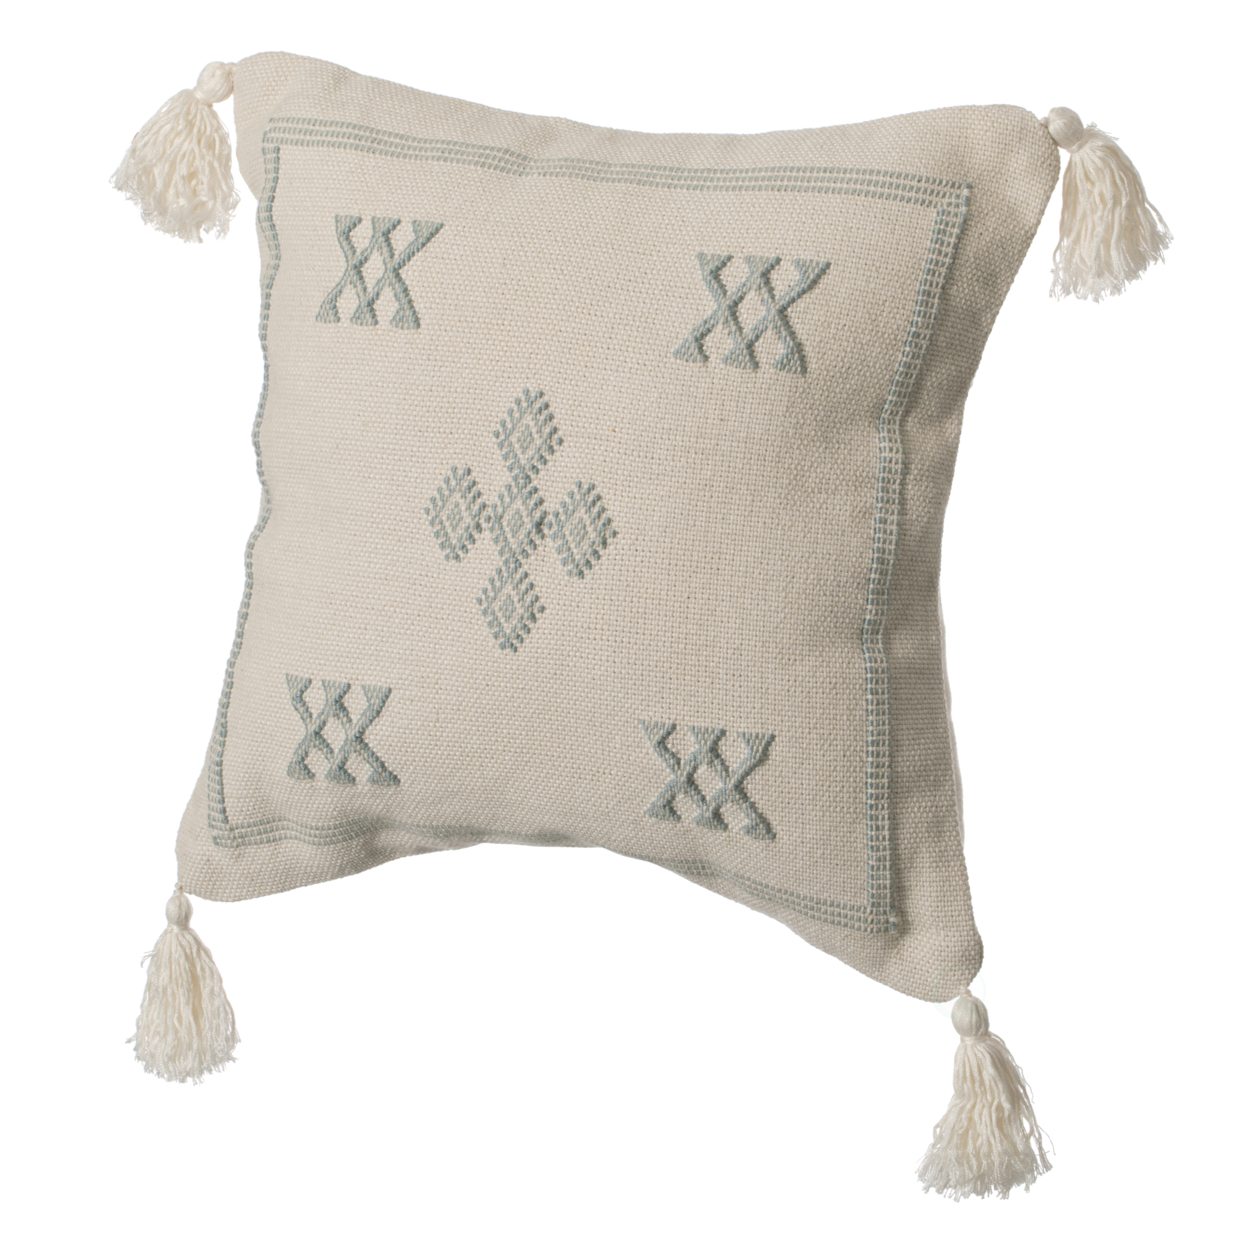 16 Throw Pillow Cover With Southwest Tribal Pattern And Corner Tassels - Grey With Cushion